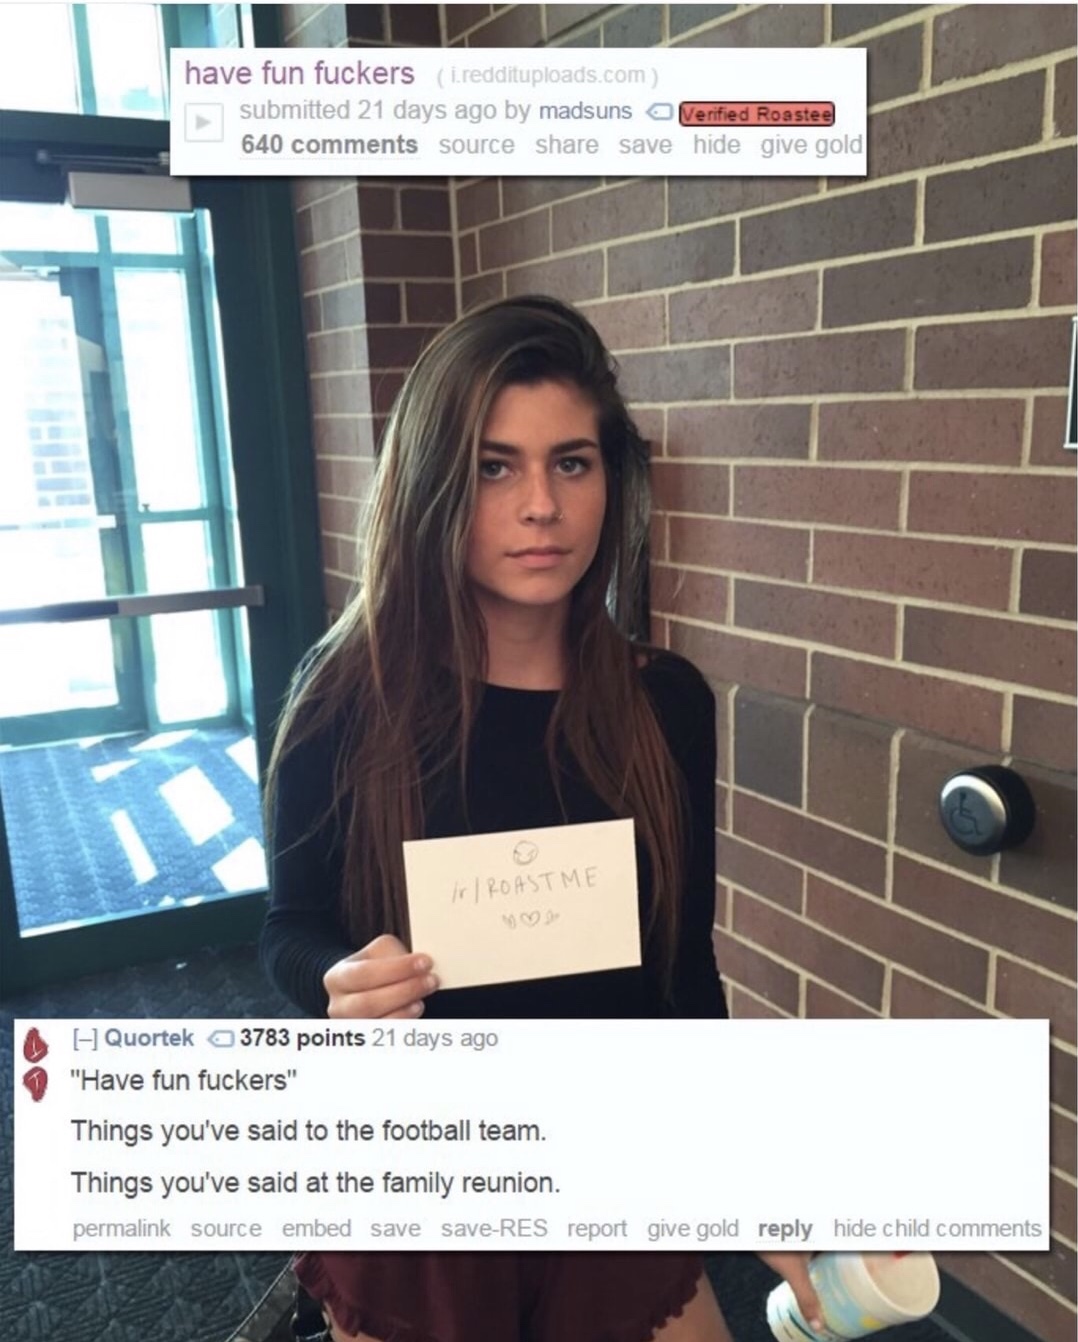 fuck my job meme - have fun fuckers i.reddituploads.com submitted 21 days ago by madsuns Verified Roastee 640 source save hide give gold Ir | Roastme A H Quortek 3783 points 21 days ago "Have fun fuckers" Things you've said to the football team. Things yo